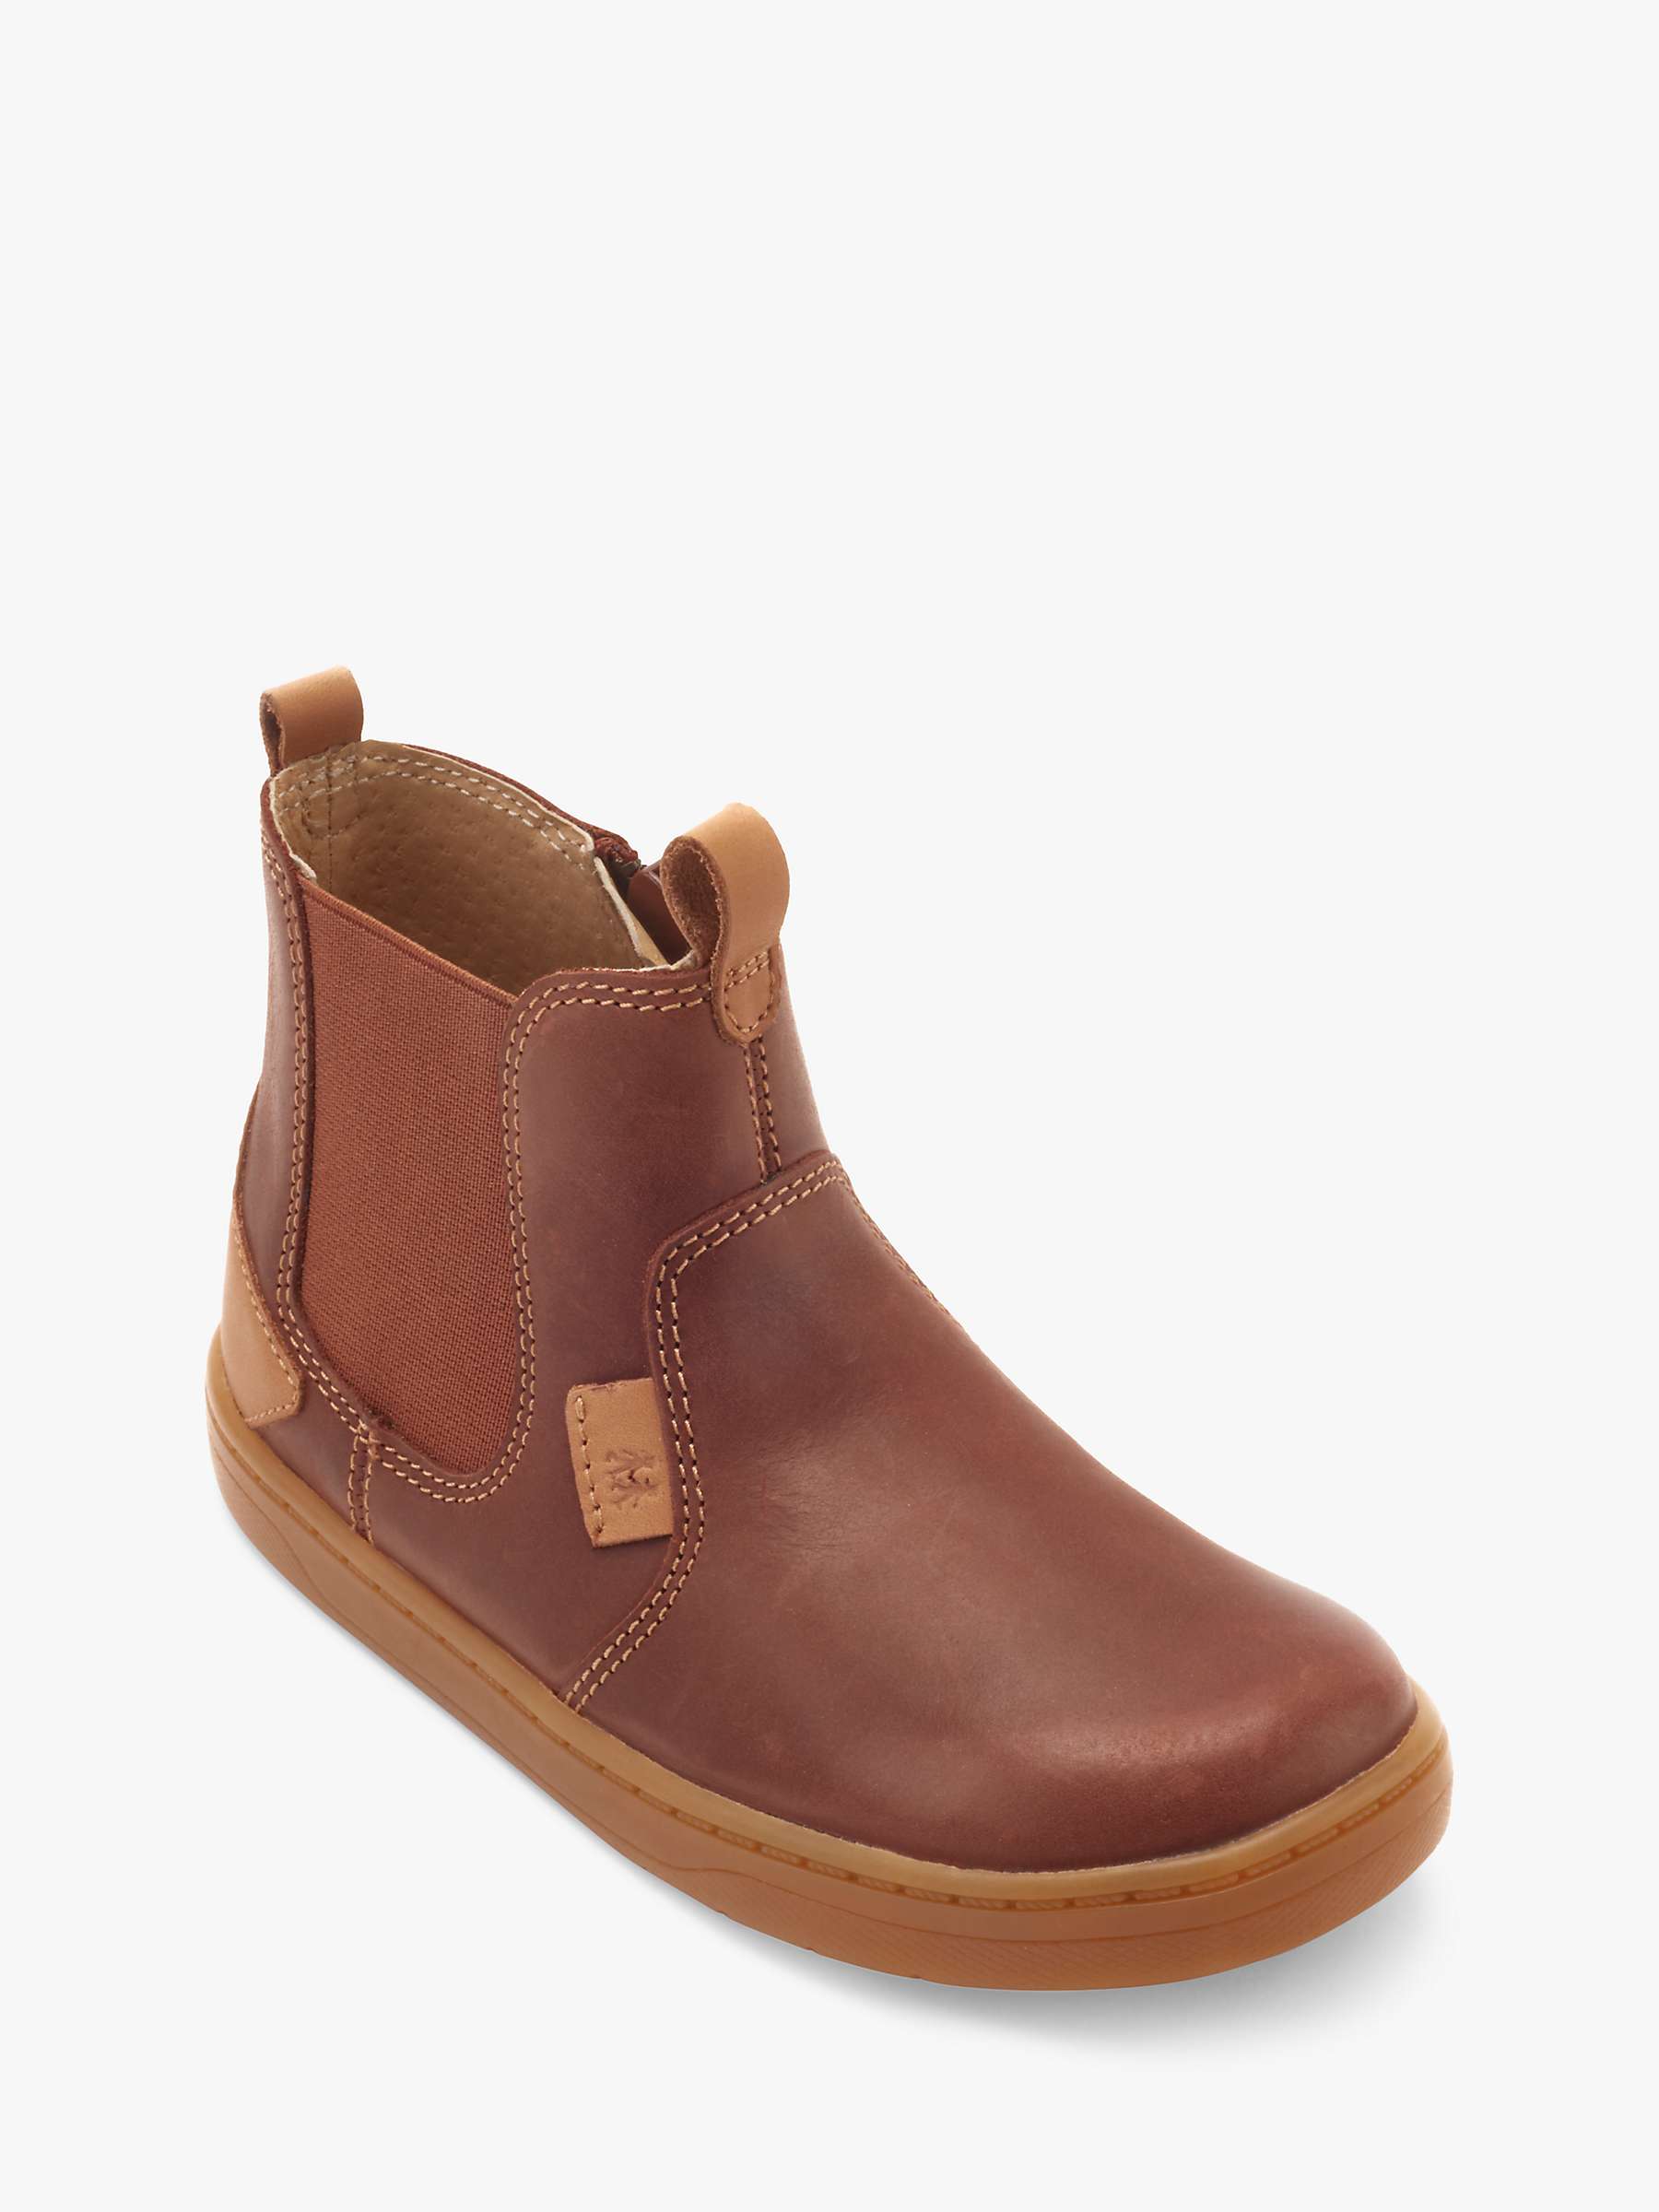 Buy Start-Rite Kid's Energy Ankle Boots, Tan Online at johnlewis.com